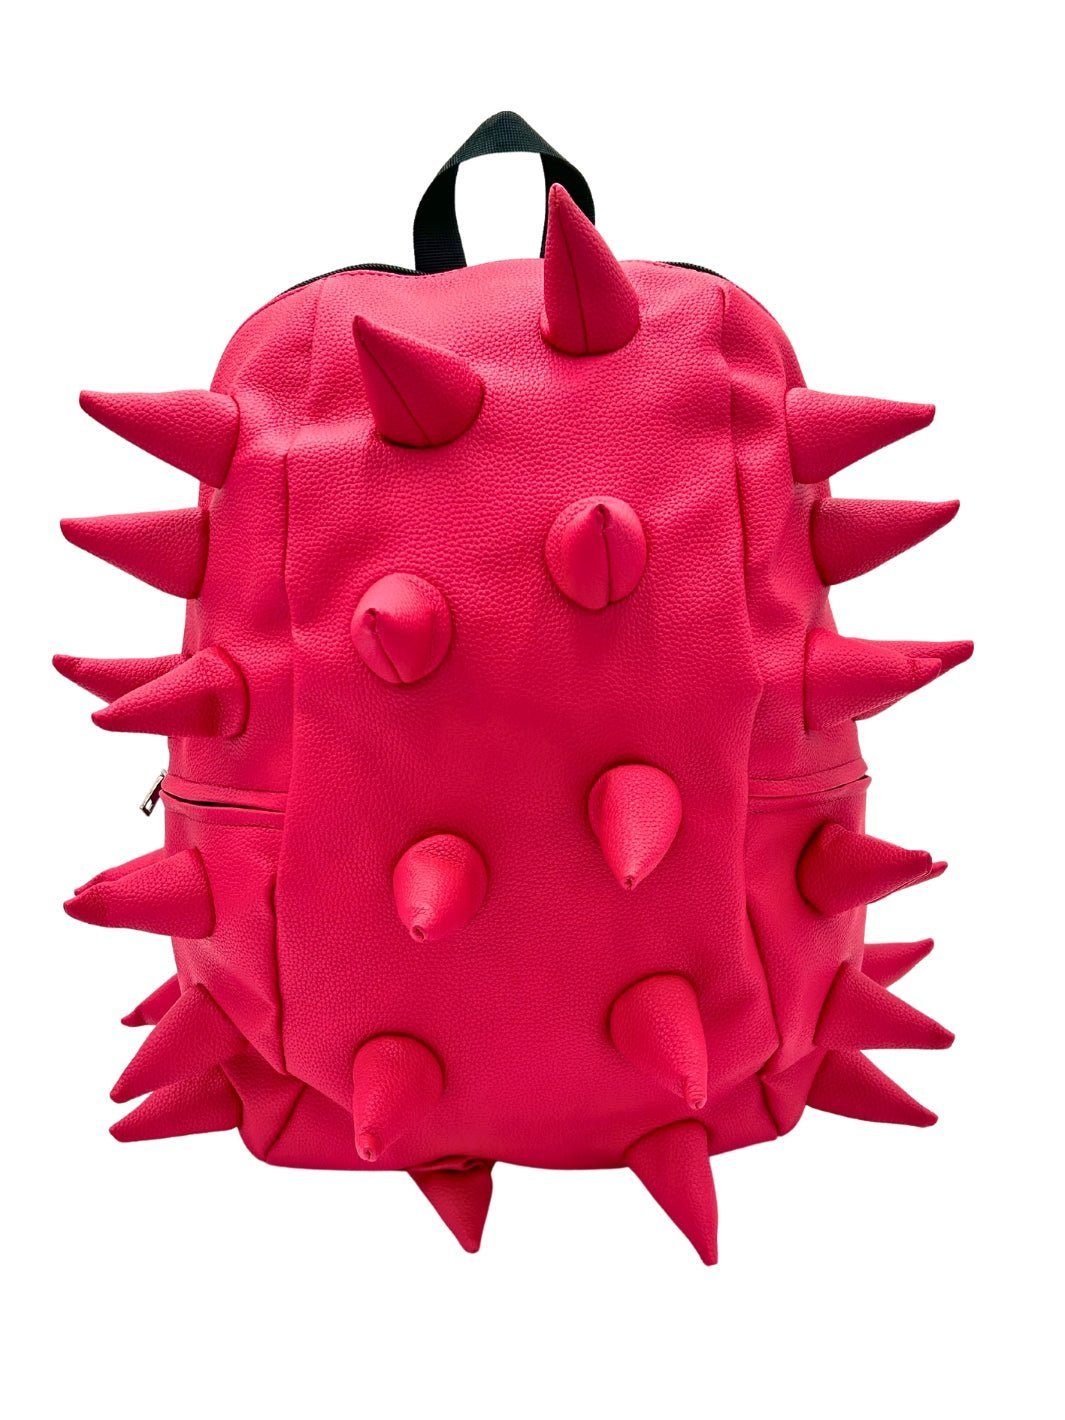 Think Pink Backpack - Madpax